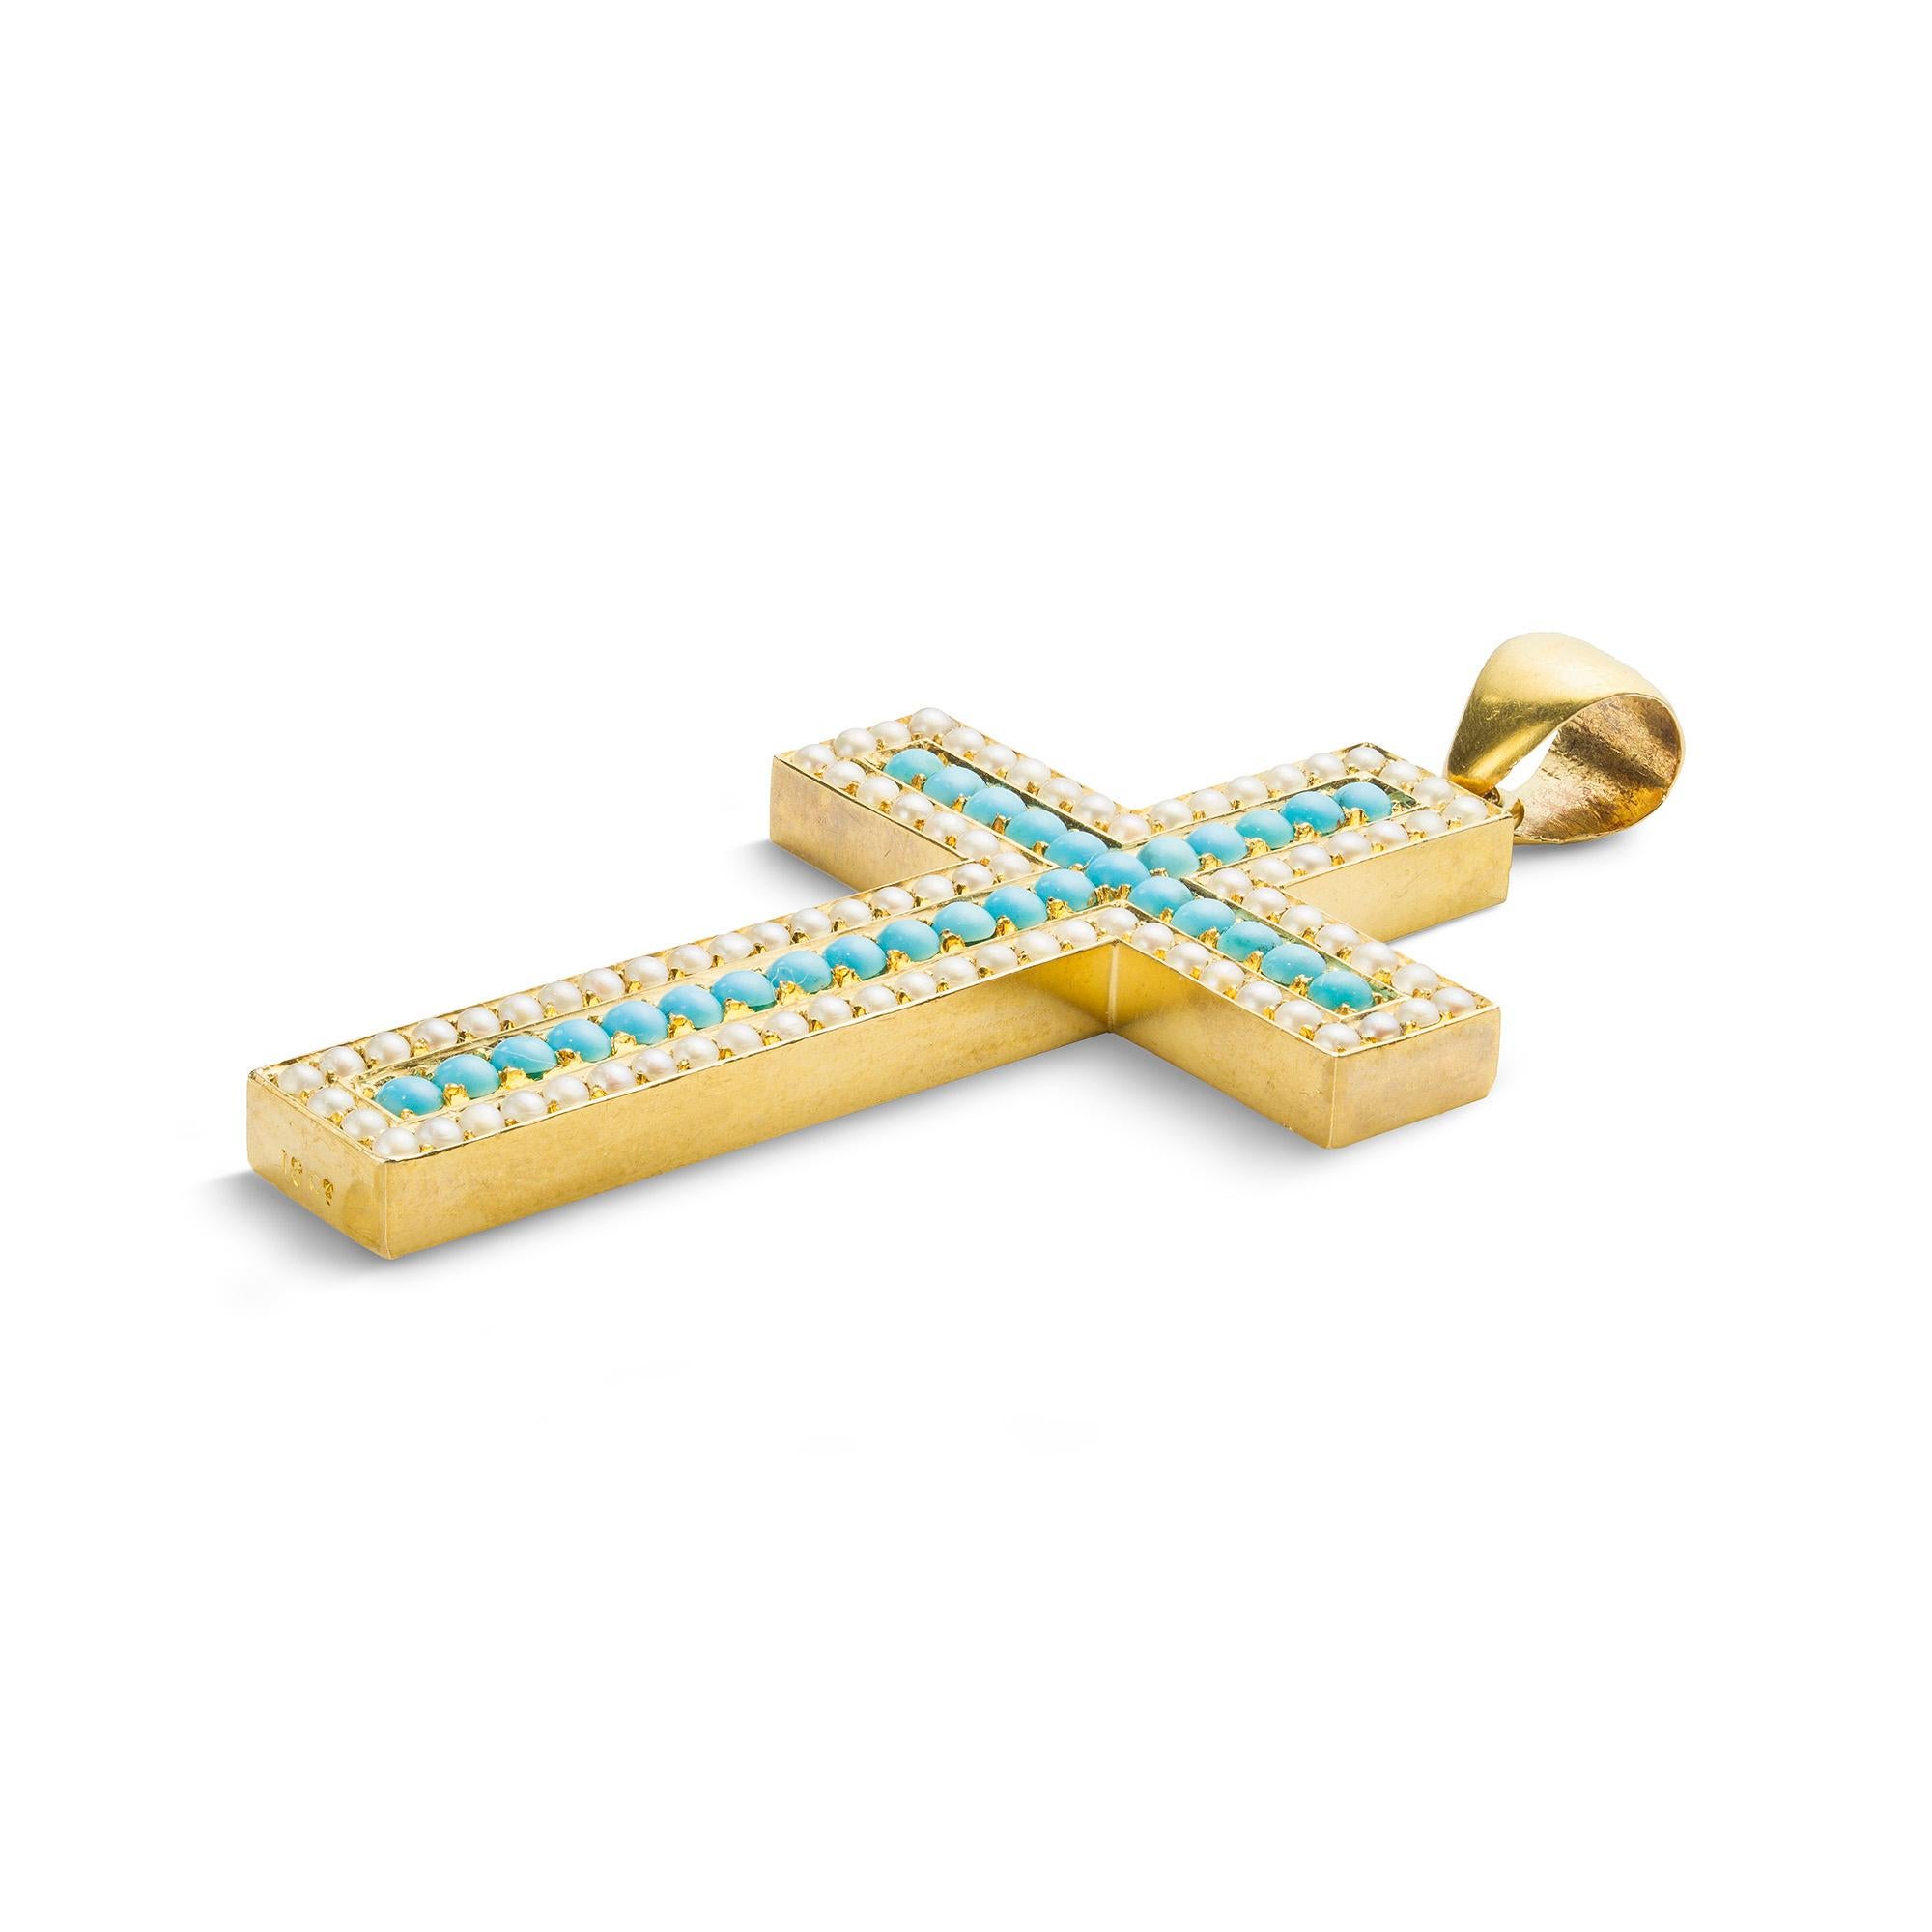 A Victorian turquoise, pearl and yellow gold cross pendant, grain-set with round turquoise cabochons within a border of half pearls, all in a yellow gold mount, circa 1860, bearing later Austrian import mark for 18ct gold, 1965-2001, the cross